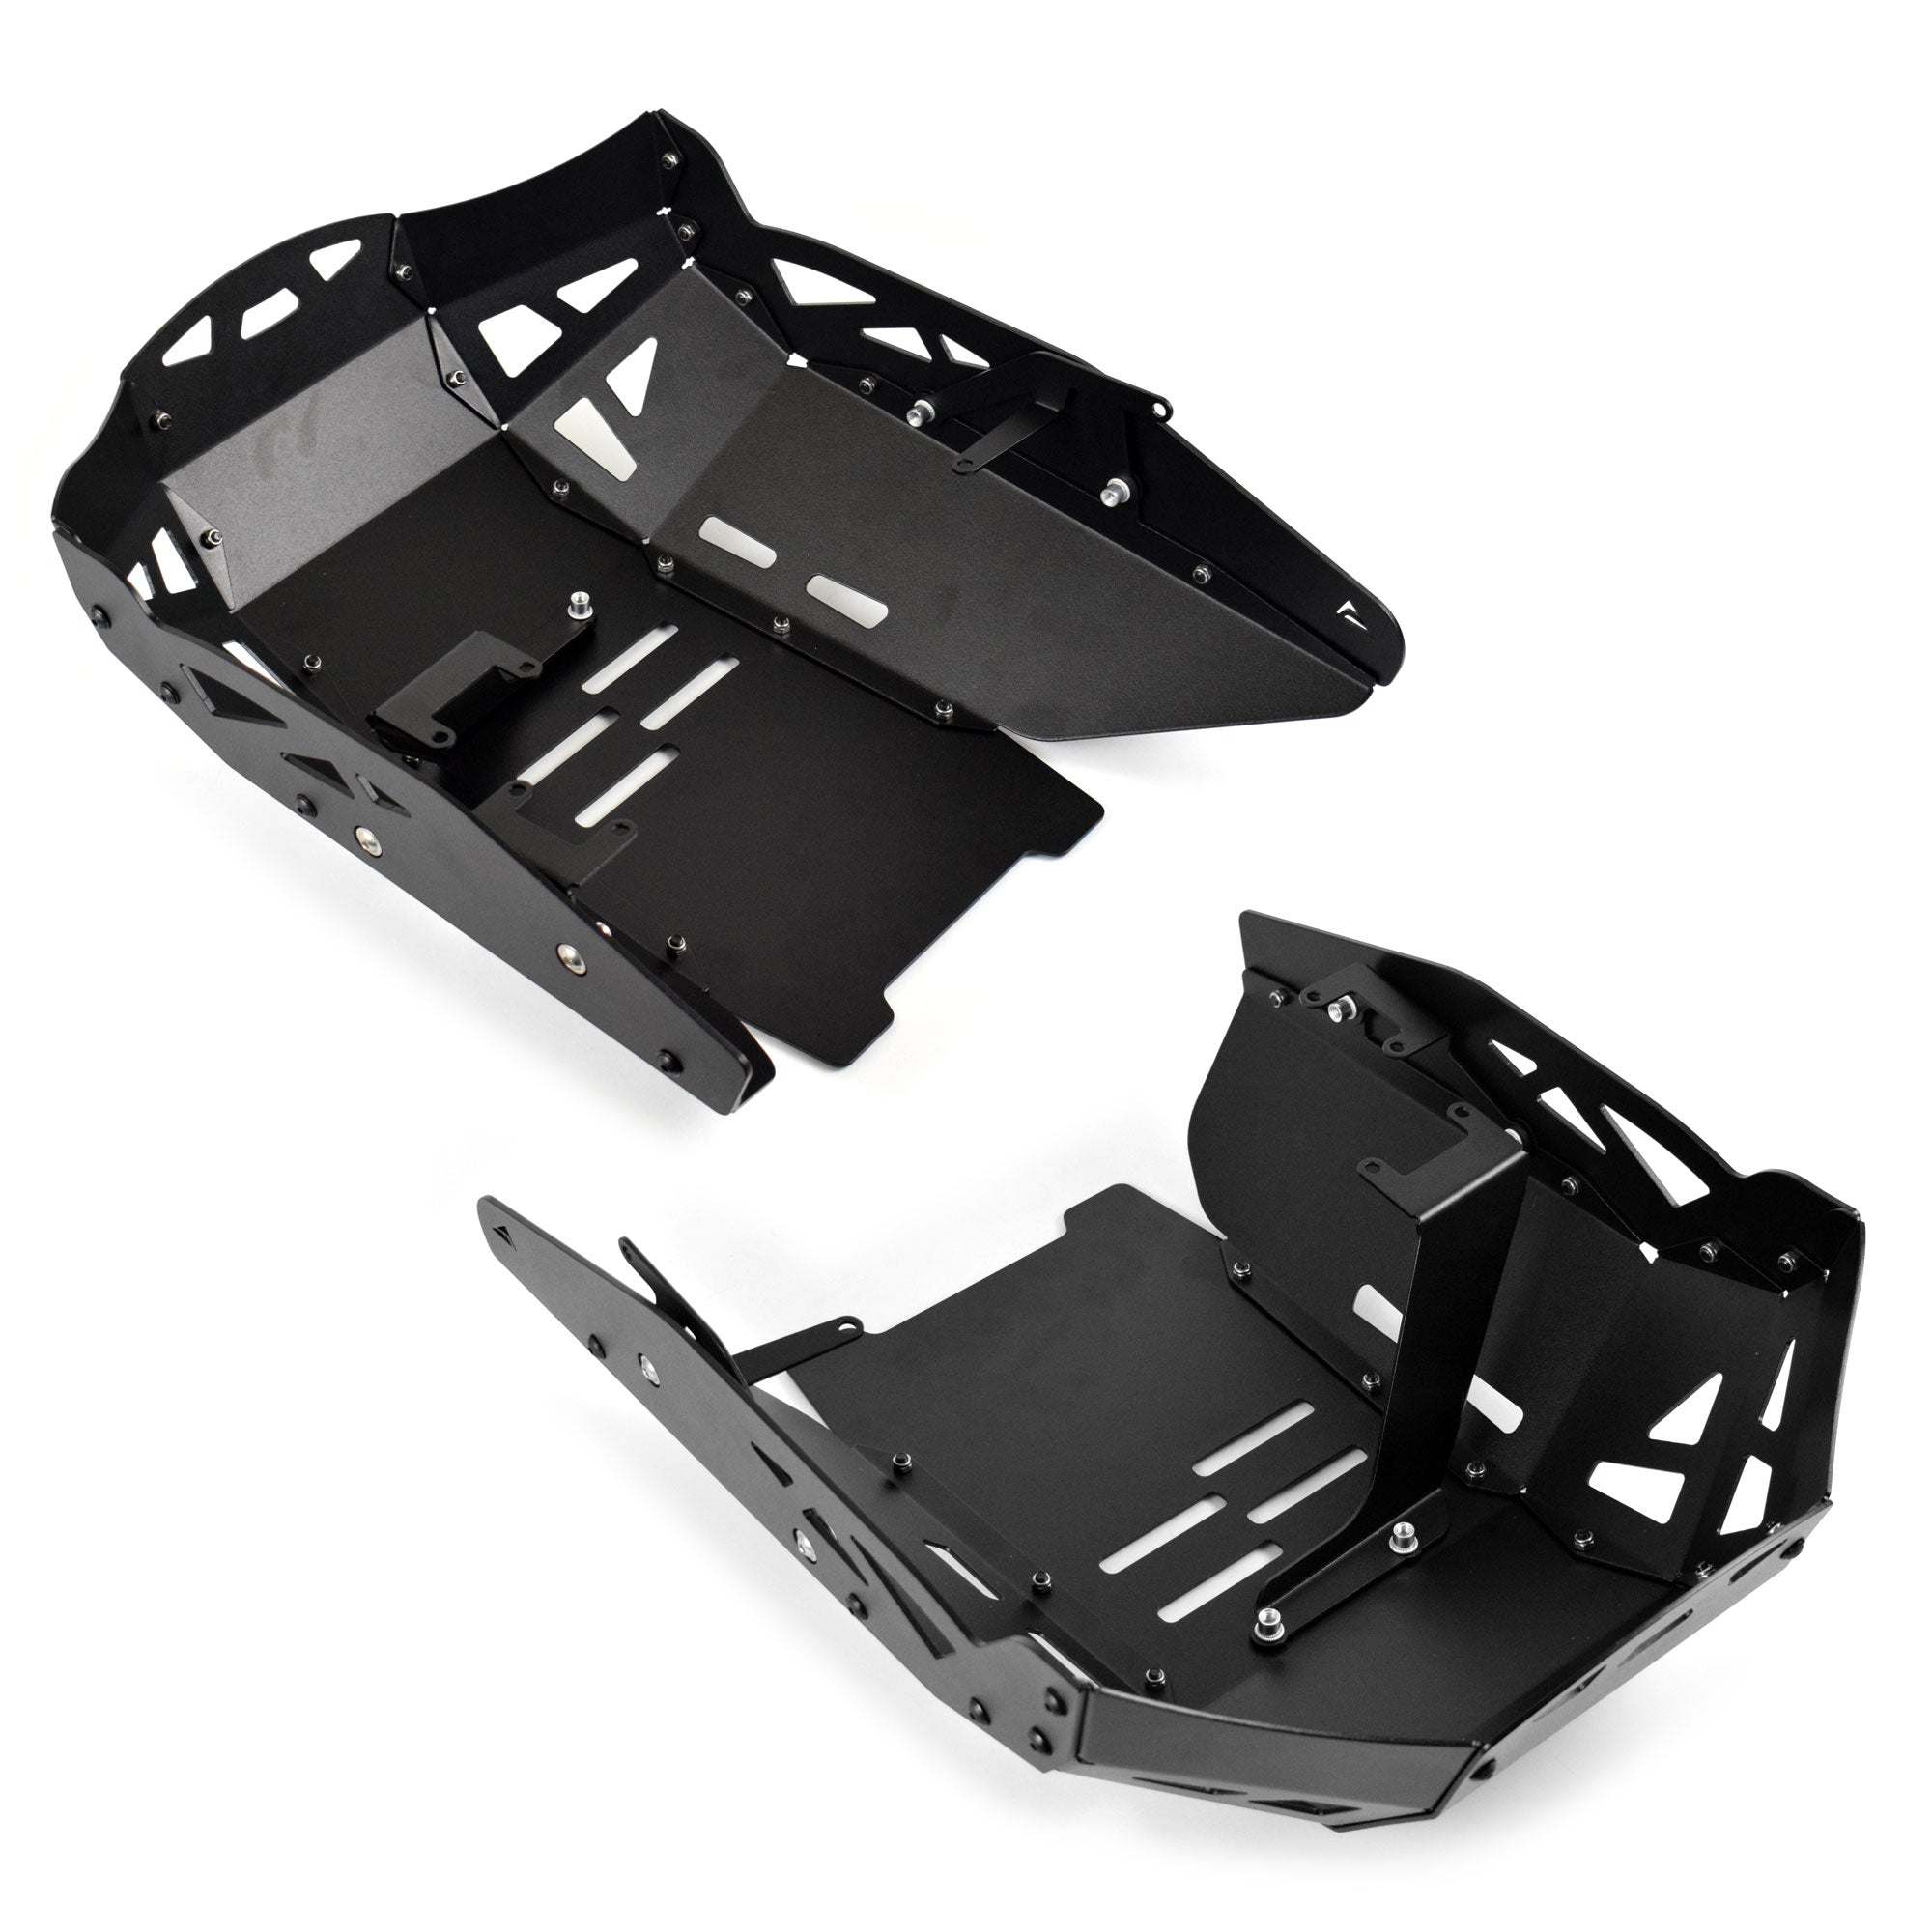 Pyramid Engine Plate | Matte Black | Yamaha Tracer 9 2021>Current-22156M-Engine Guards-Pyramid Motorcycle Accessories